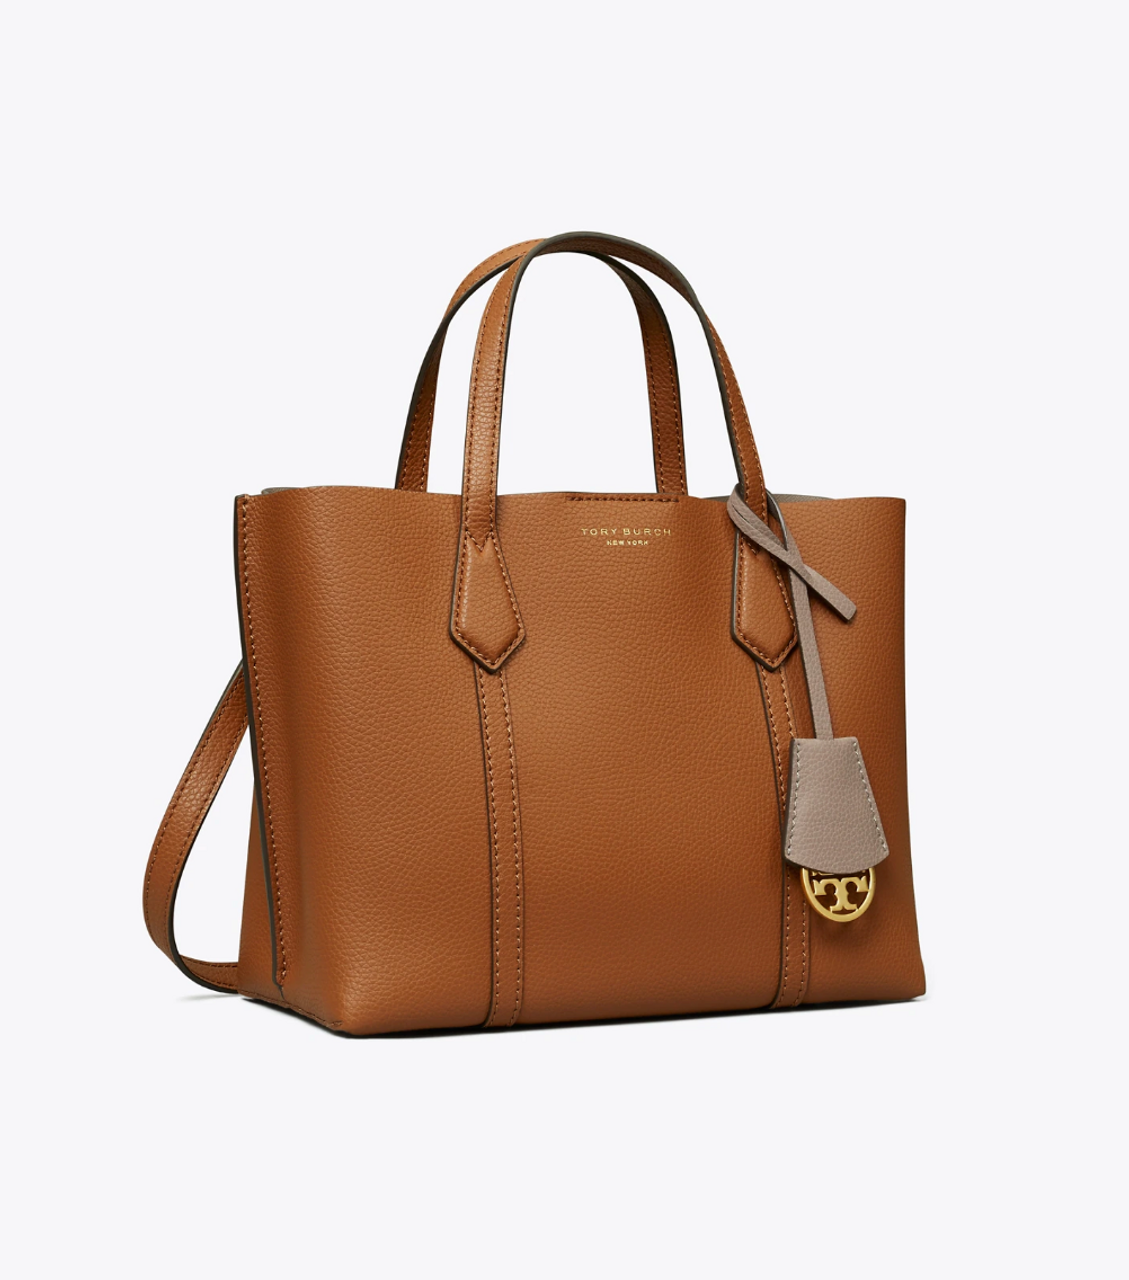 Tory Burch Perry Triple-compartment Tote Bag in Yellow